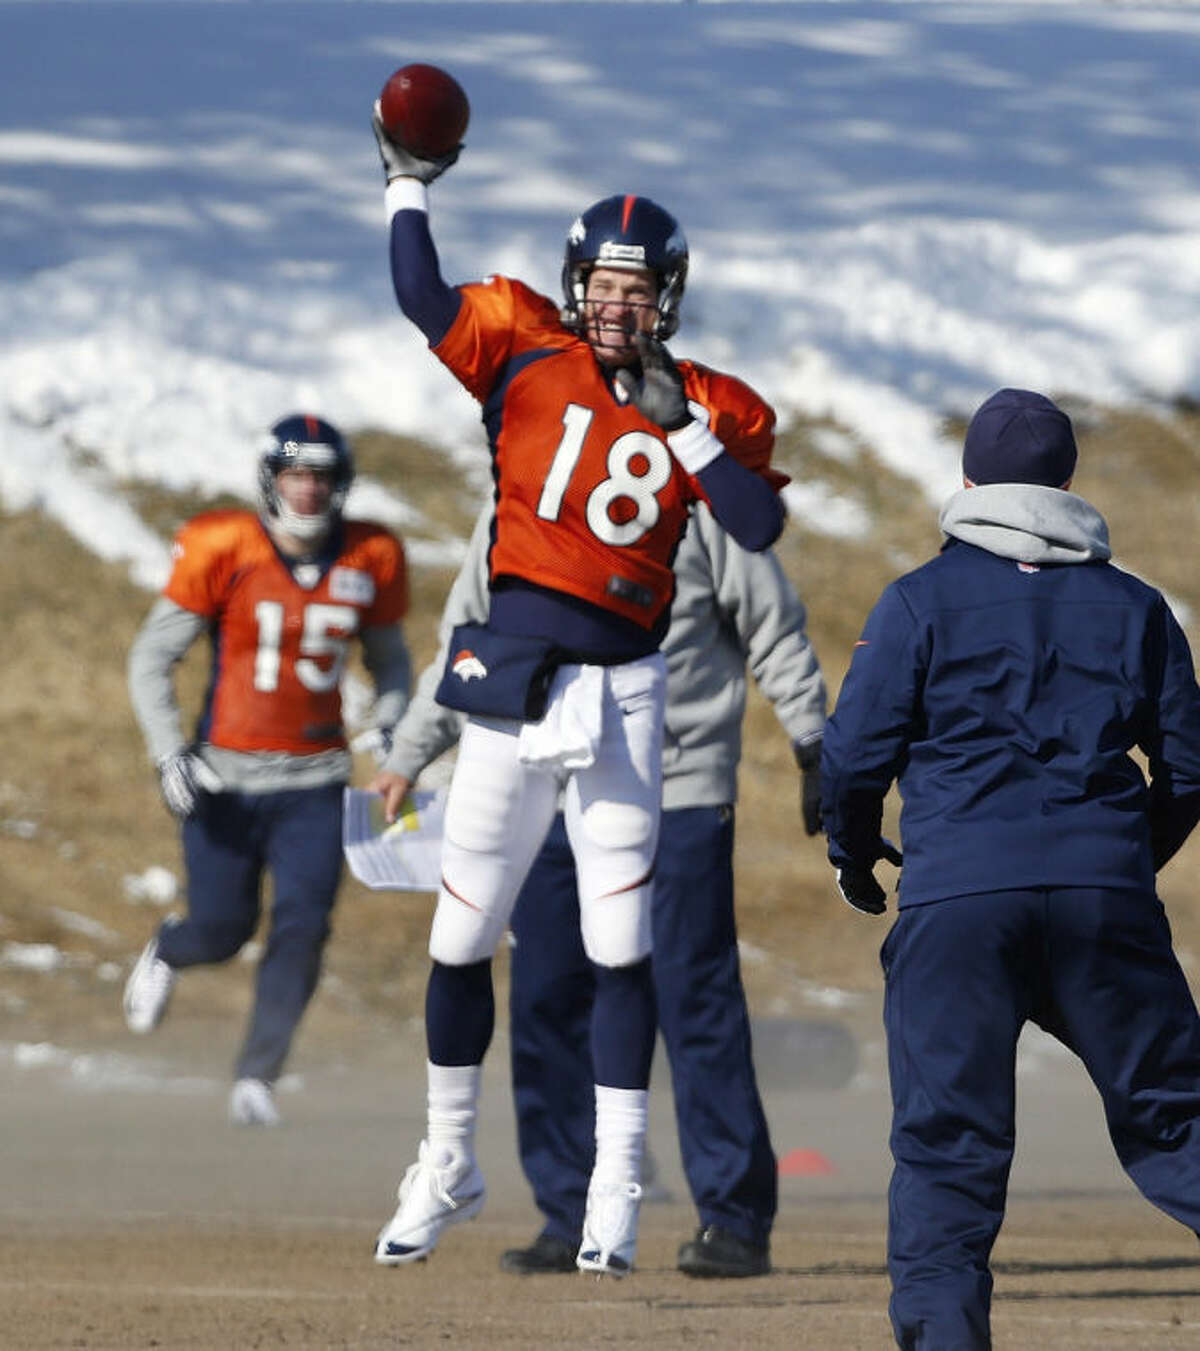 Denver Broncos quarterback Peyton Manning (18) throws a pass during NFL football practice at the team's training facility in Englewood, Colo., on Thursday, Jan. 23, 2014. The Broncos are scheduled to play the Seattle Seahawks in Super Bowl XLVIII on Feb. 2. (AP Photo/Ed Andrieski)